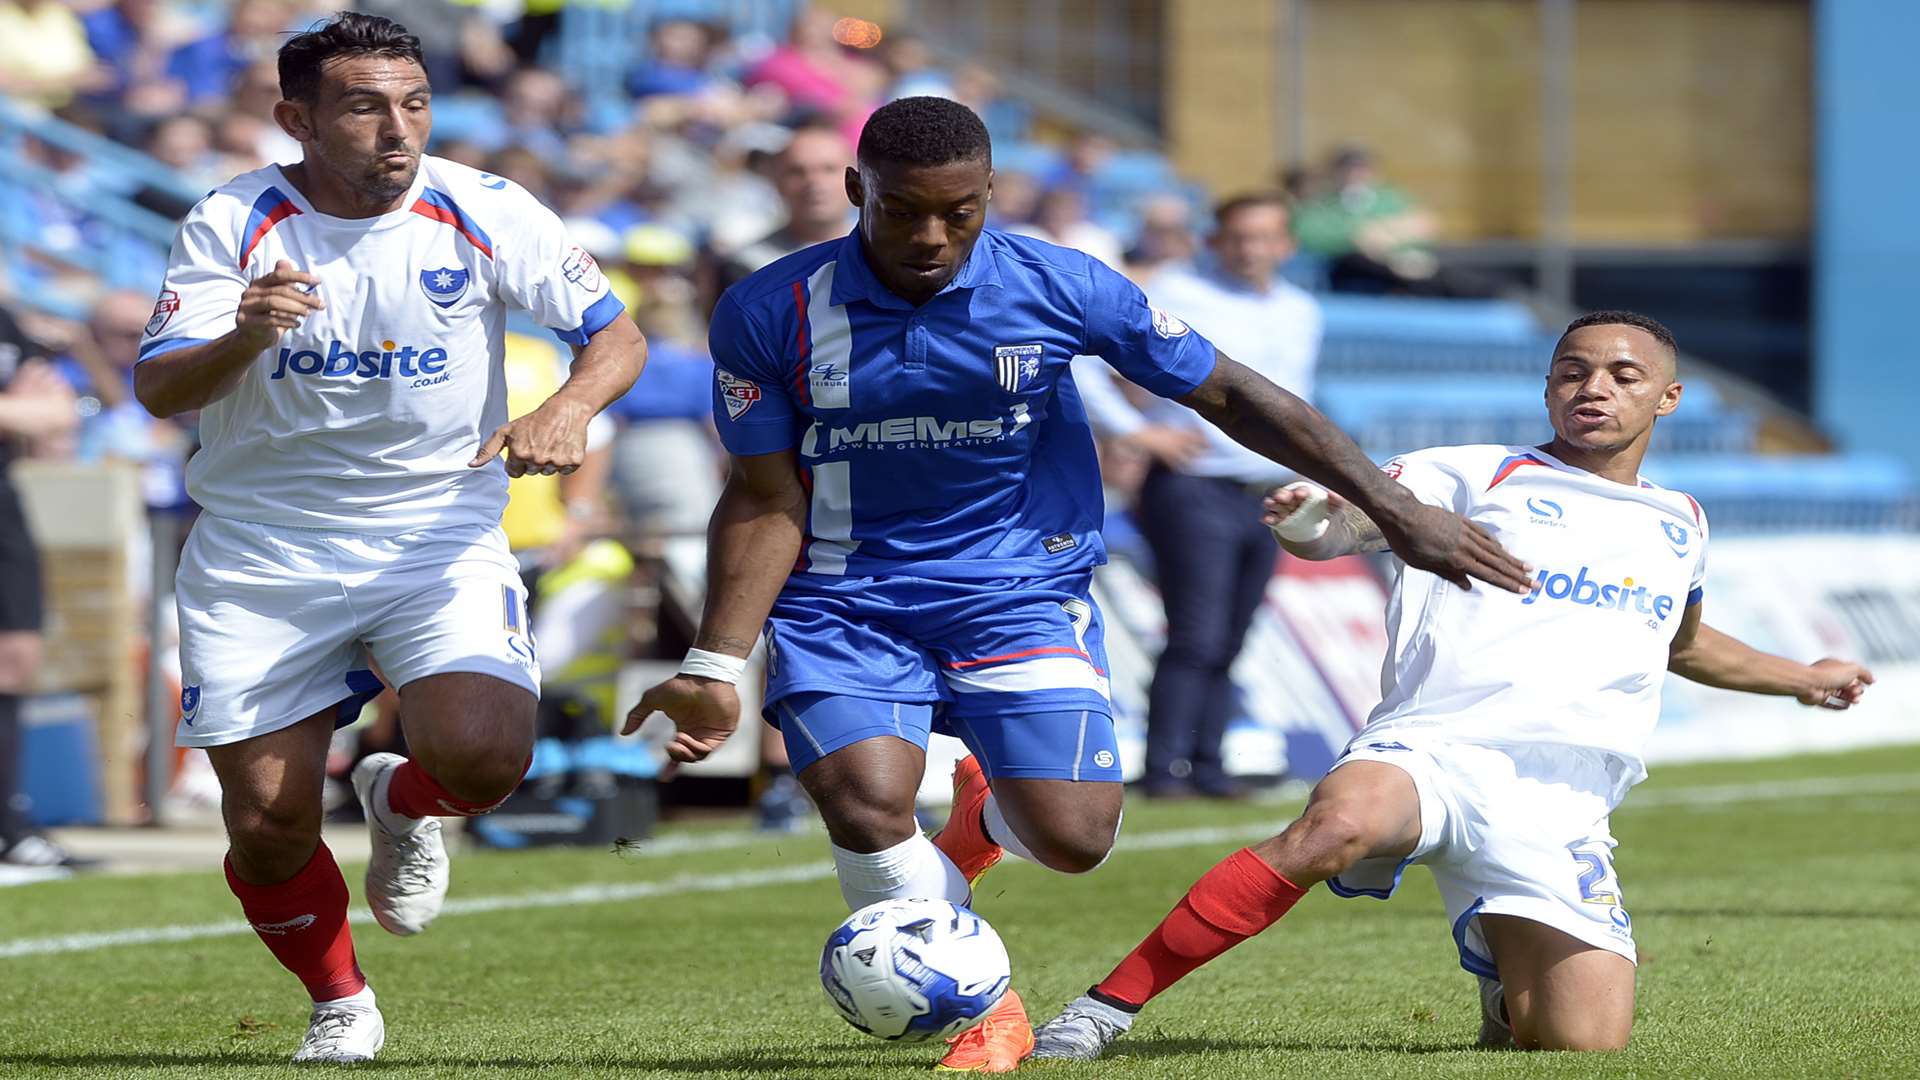 Ryan Jackson has impressed since joining Gills in the summer. Picture: Barry Goodwin